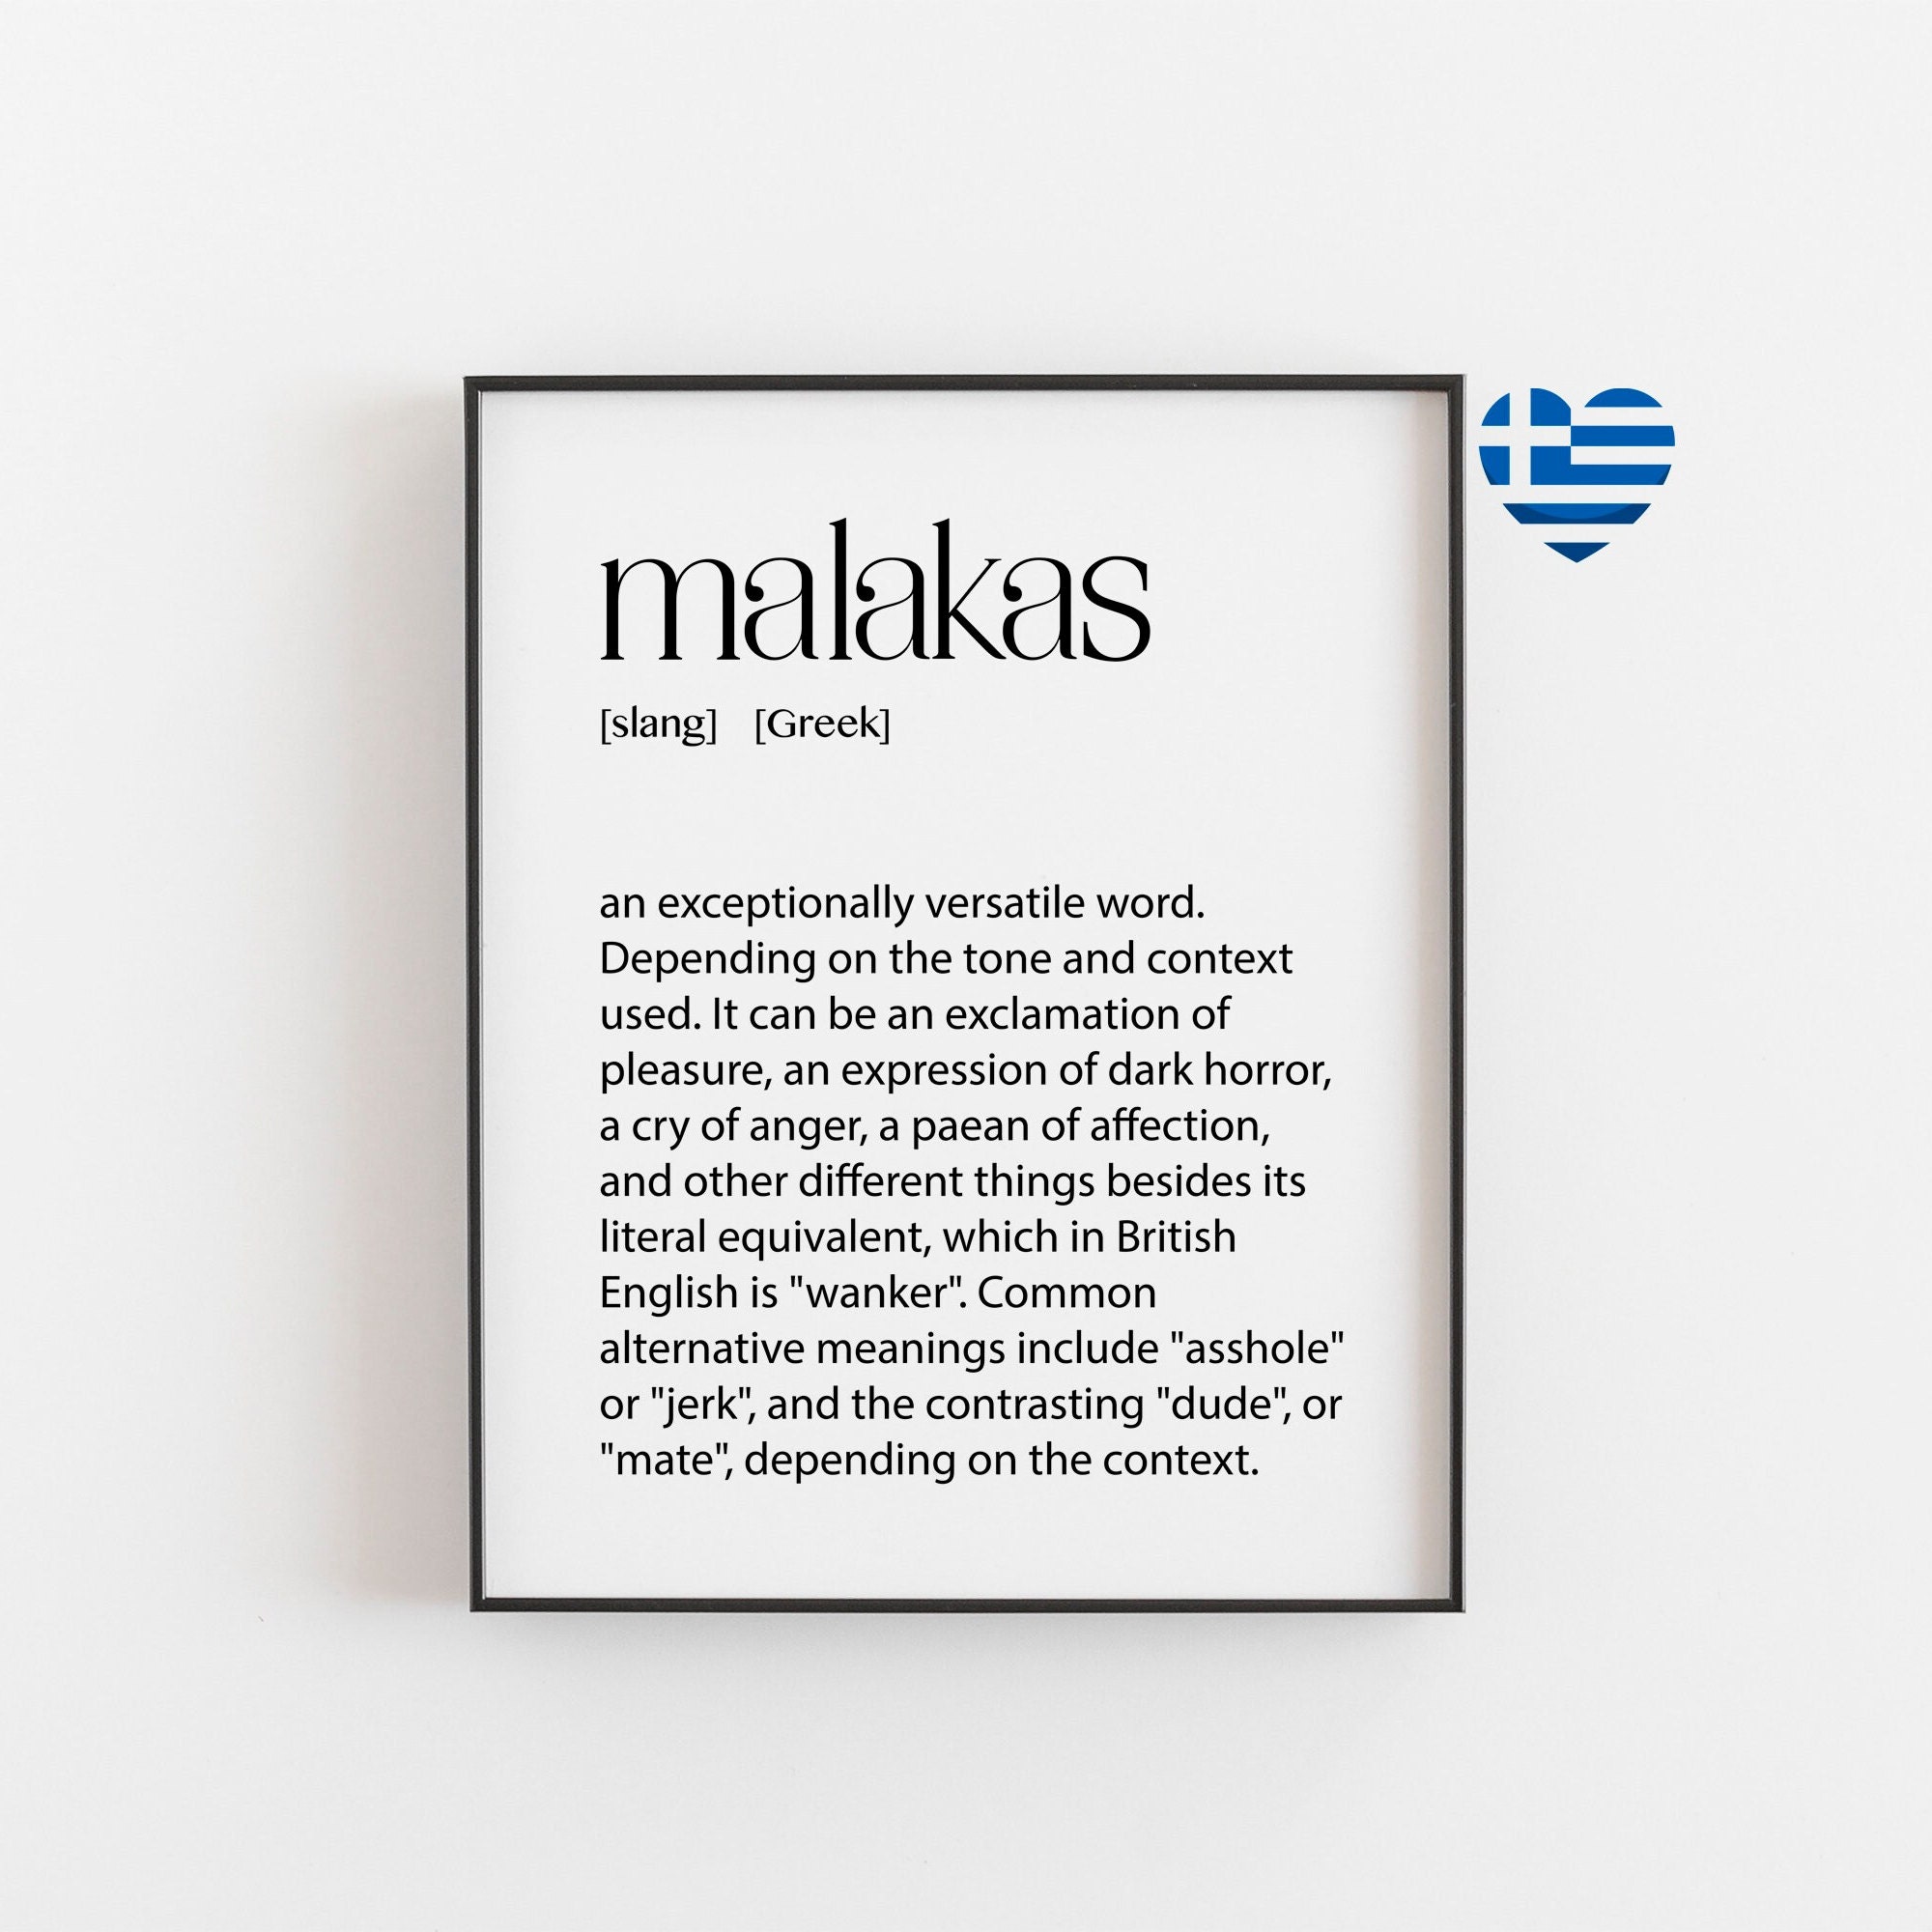 My new favorite word is Malaka! But what does it mean? : r